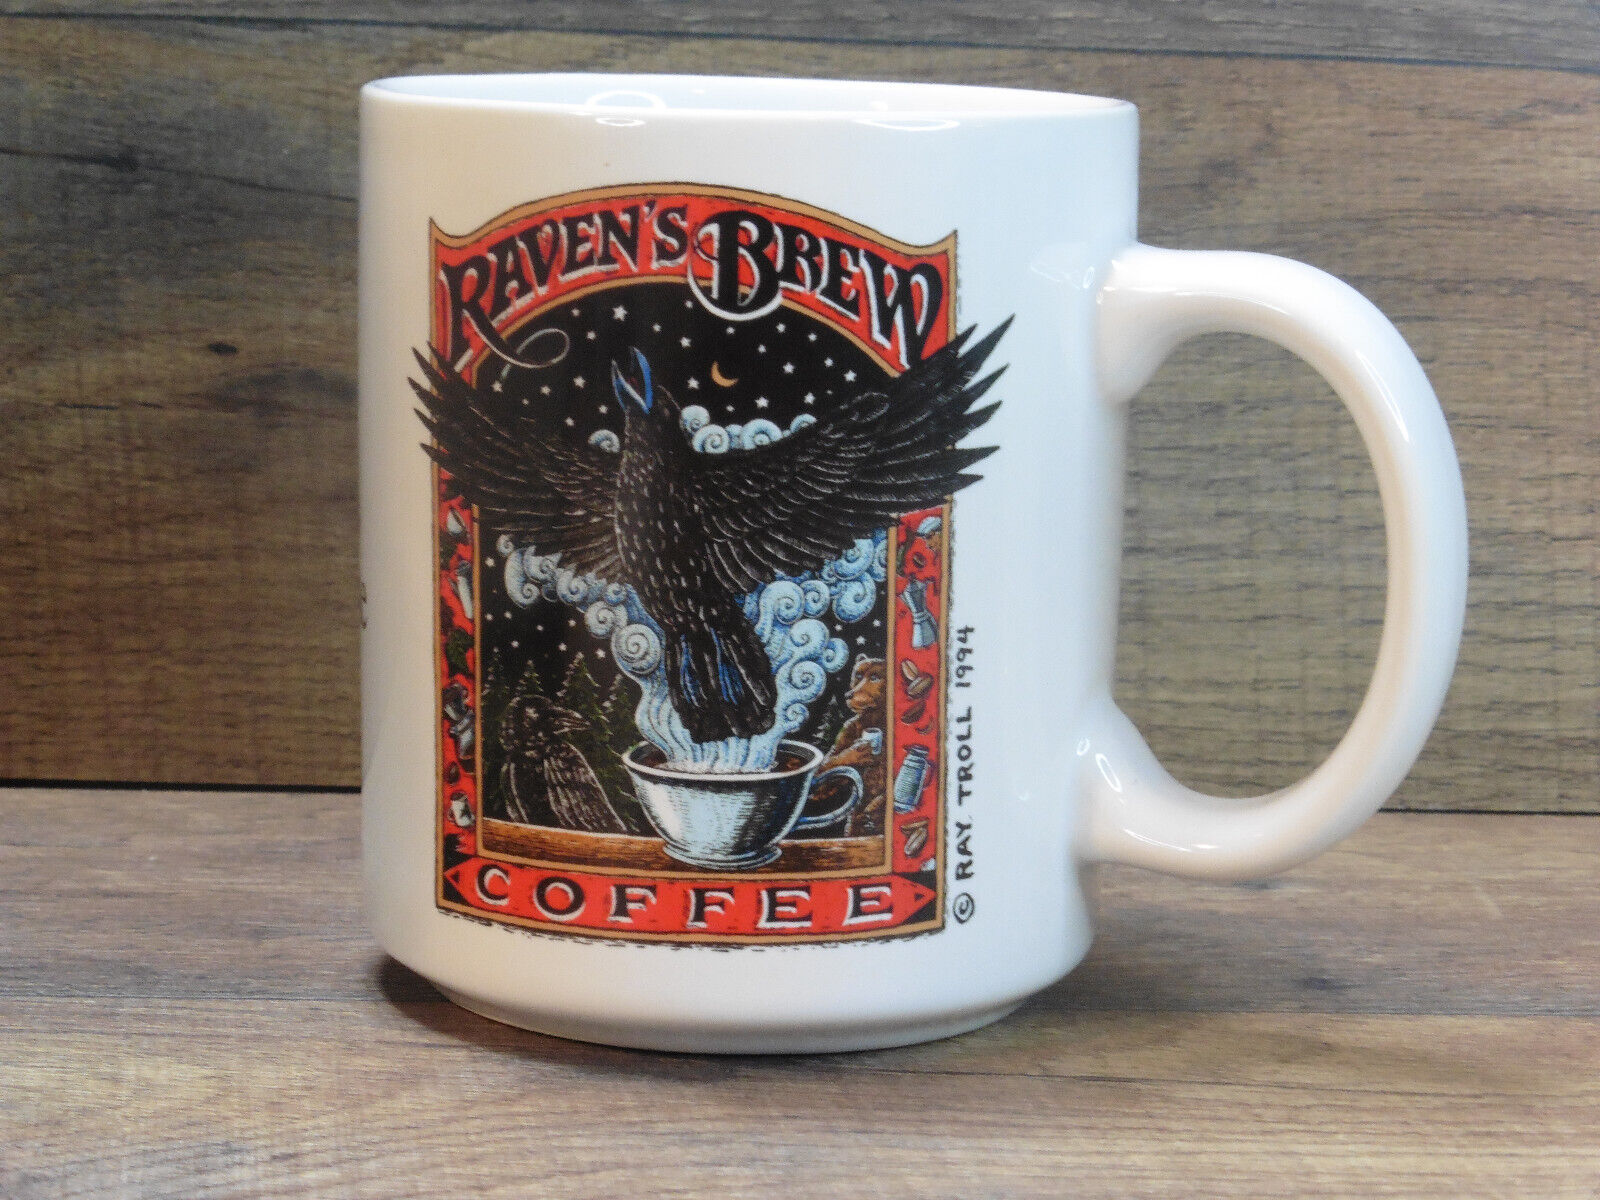 Raven\'s Brew Coffee Mug 10oz Quoth the raven Pour some more Ray Troll 1994 Cup